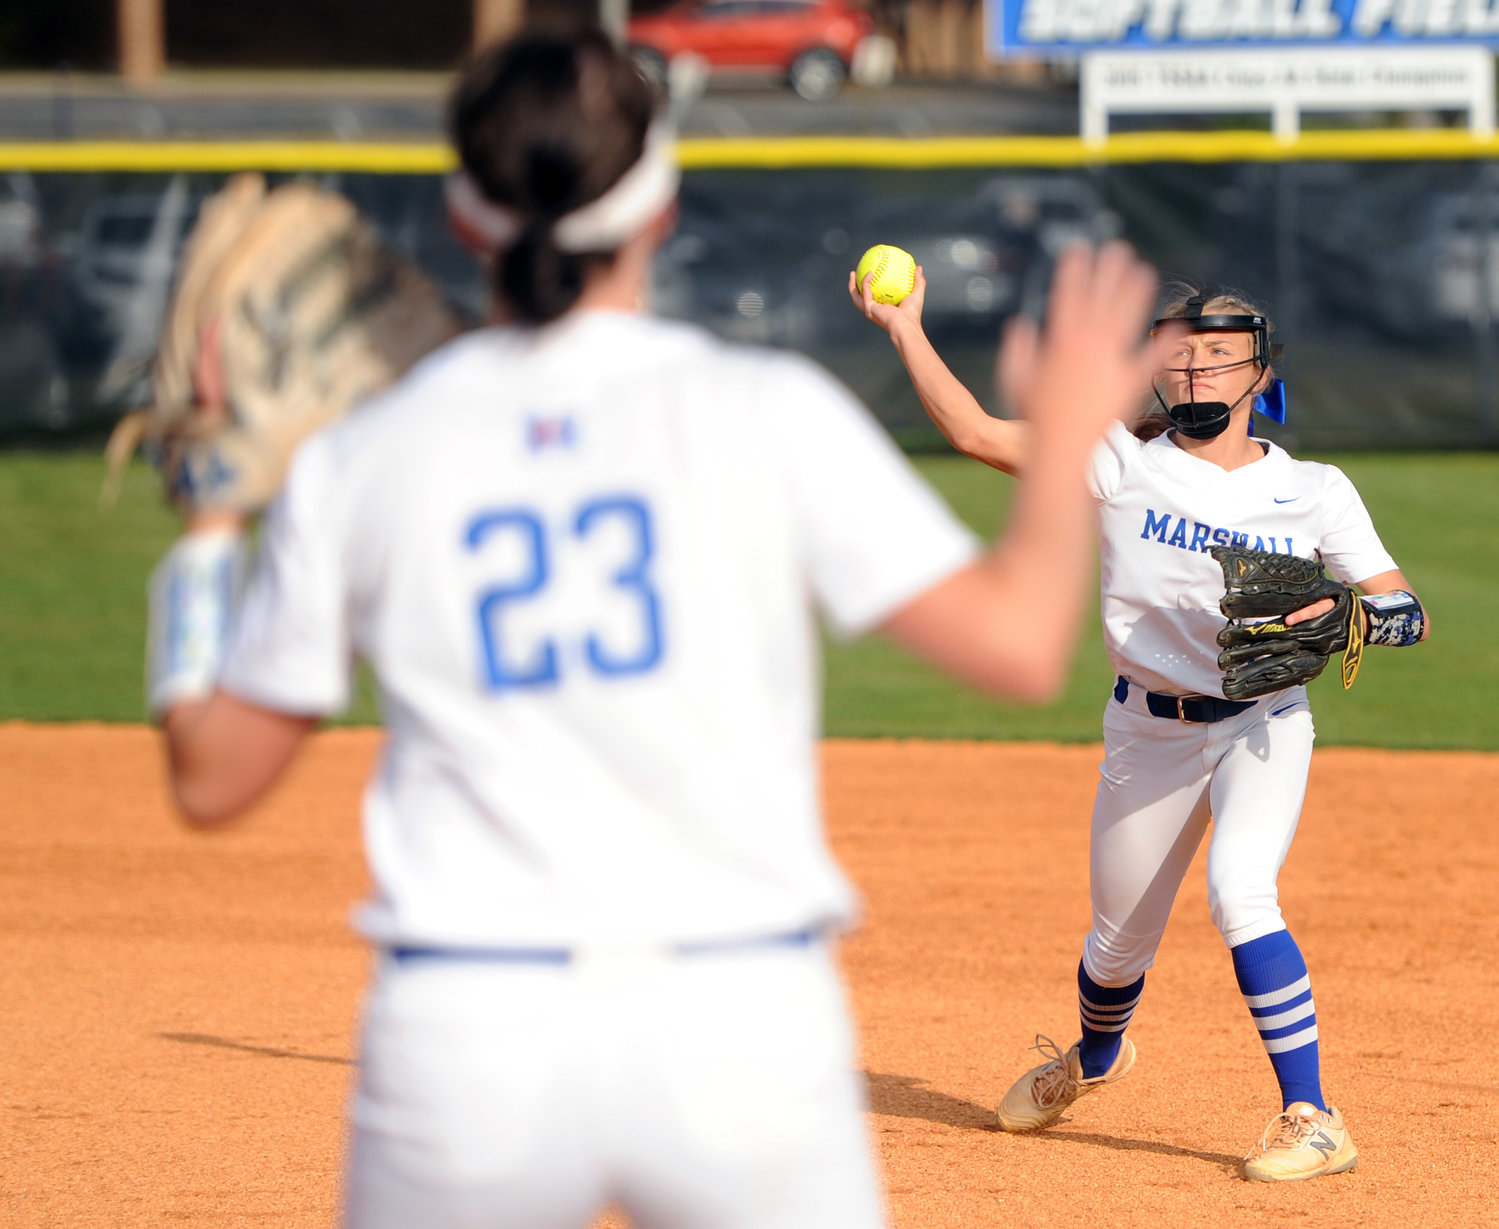 Second baseman Courtney Lynch fires the throw to first baseman Mallory Woodward for the out.